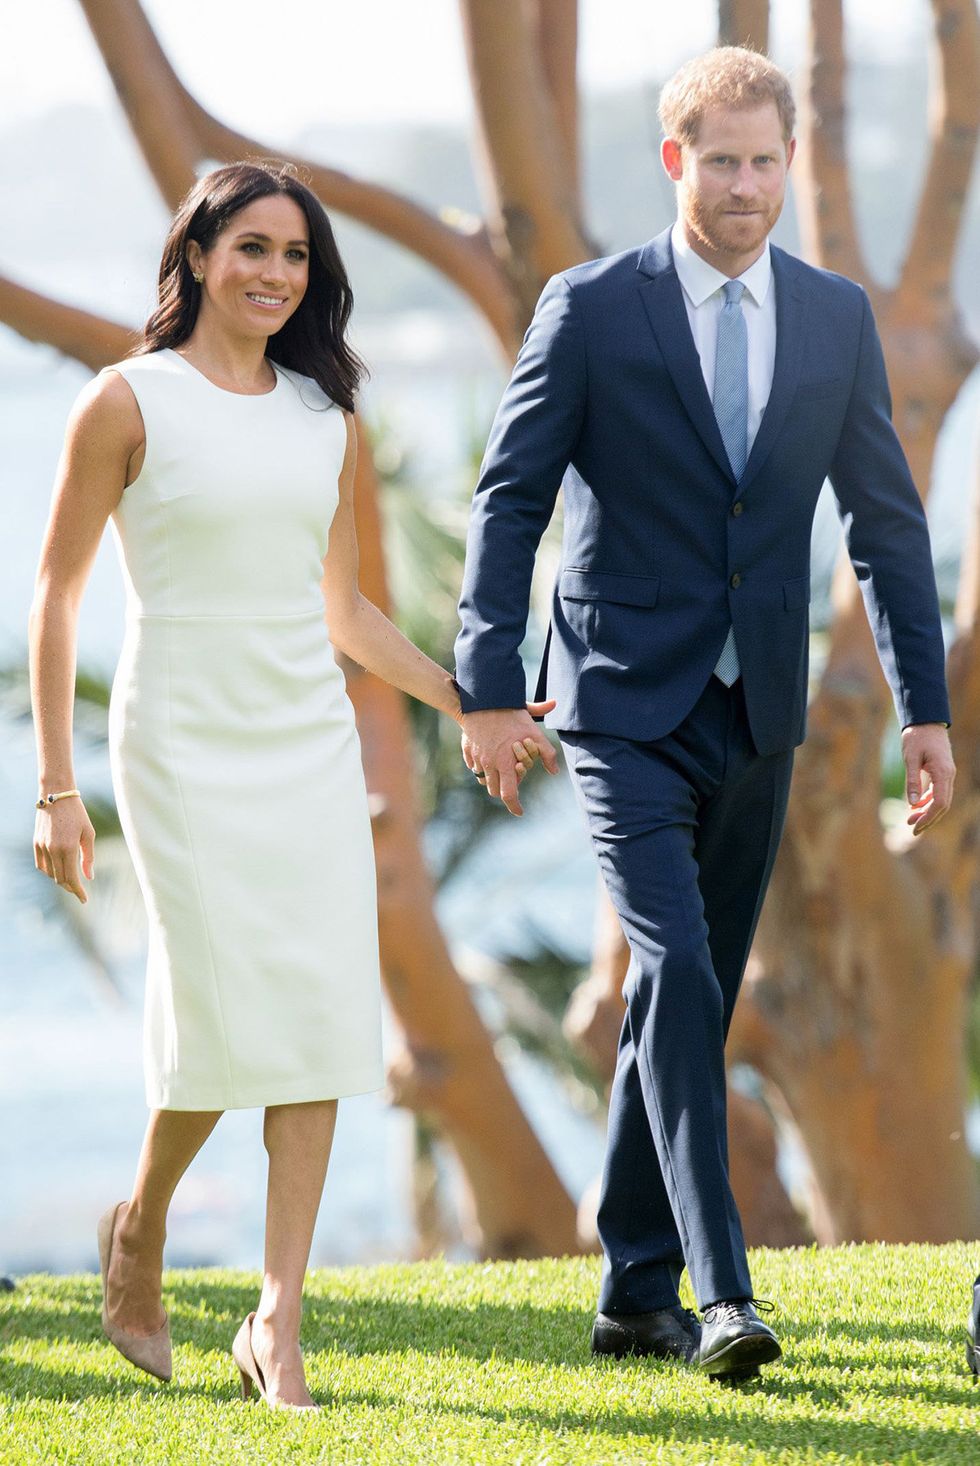 Clothing, Suit, Formal wear, Yellow, Holding hands, Dress, Gesture, Fashion, Walking, Interaction, 